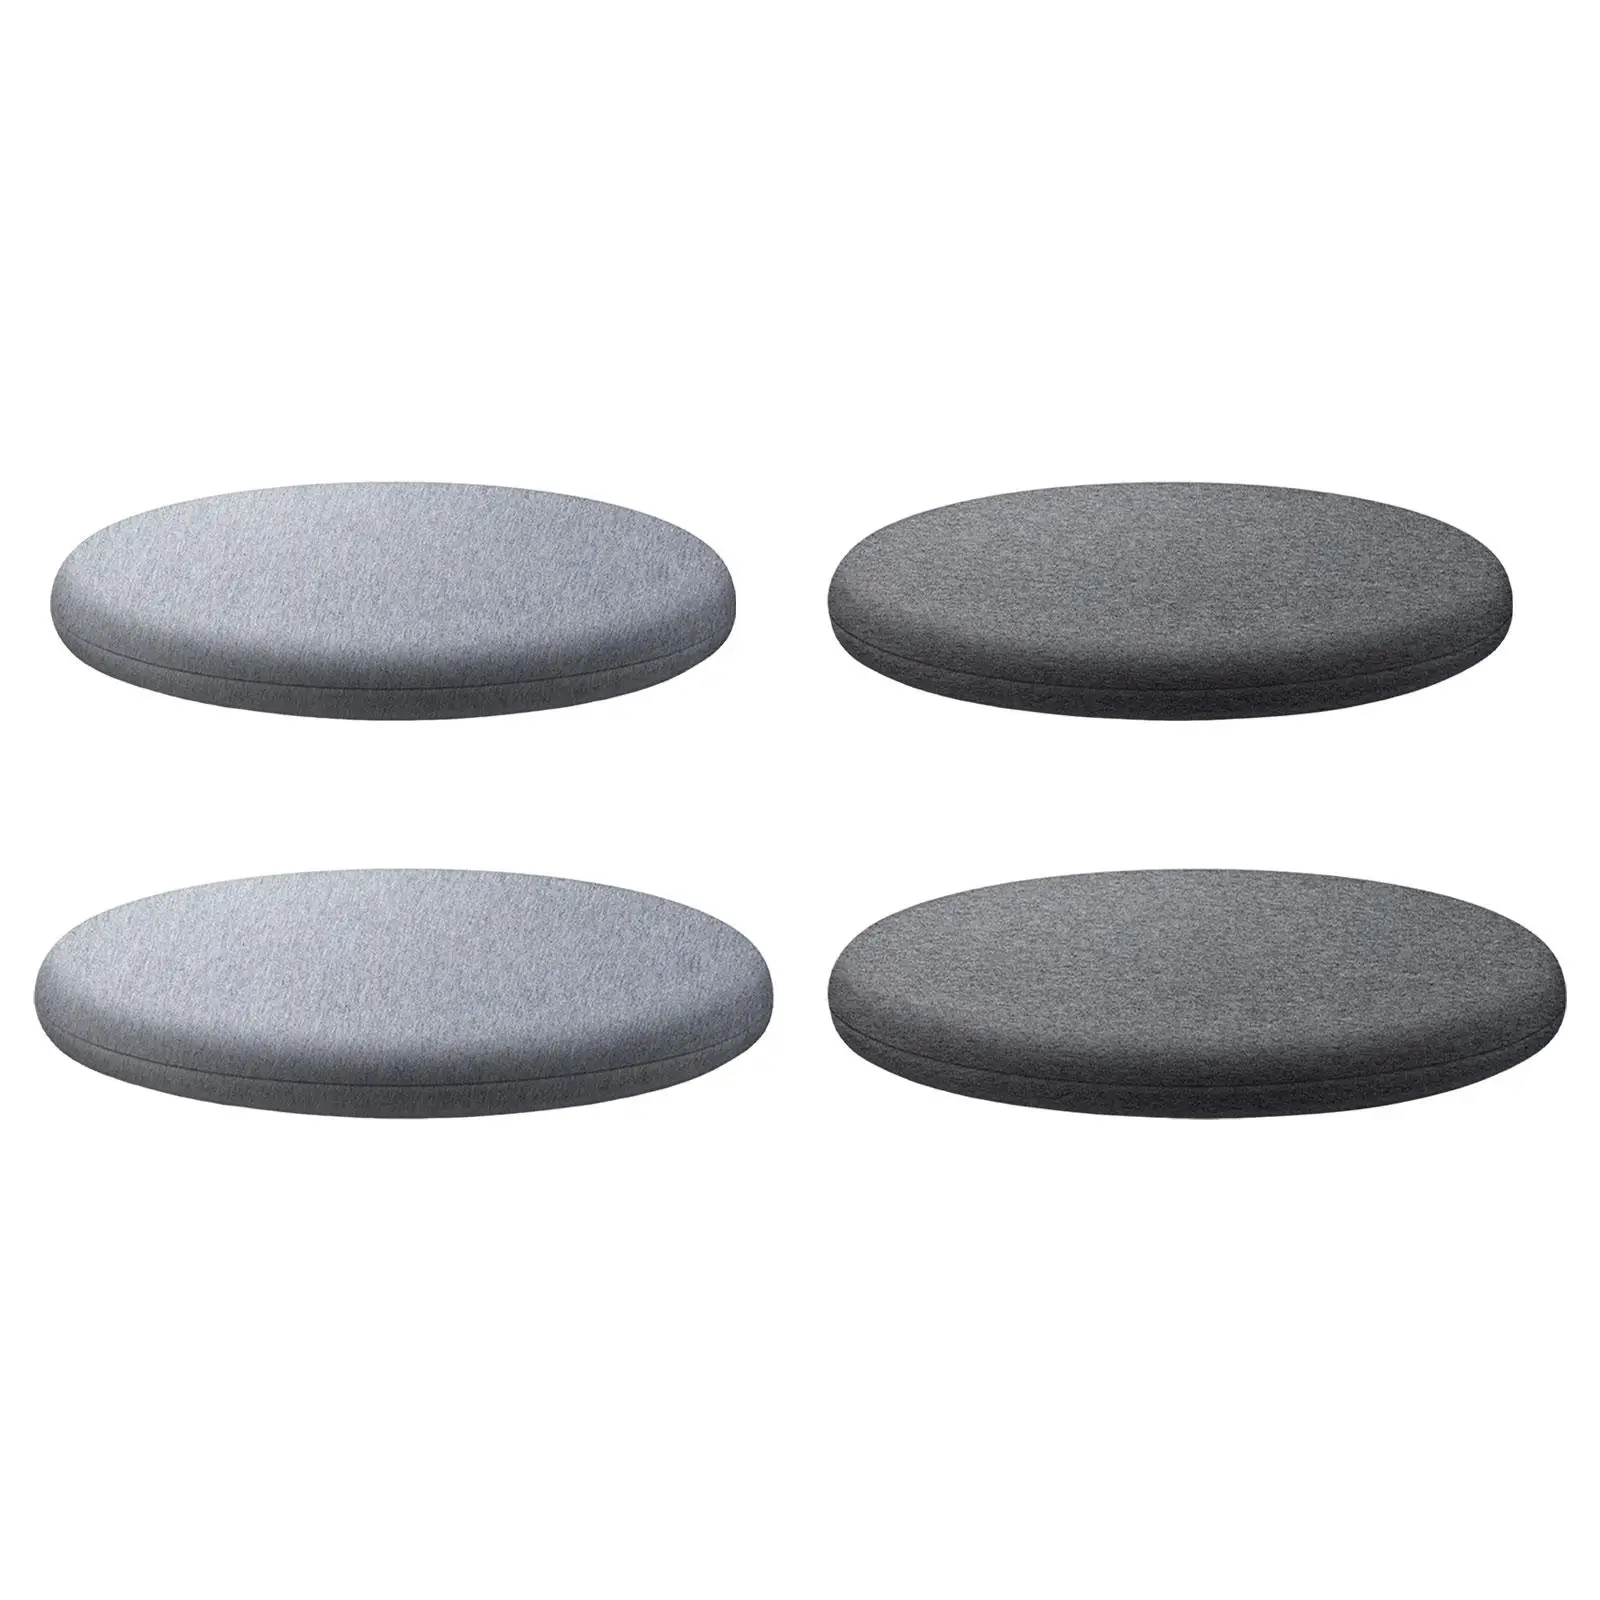 Round Seat Pad Soft Memory Foam Seat Cushion for Dining Room Office Kitchen